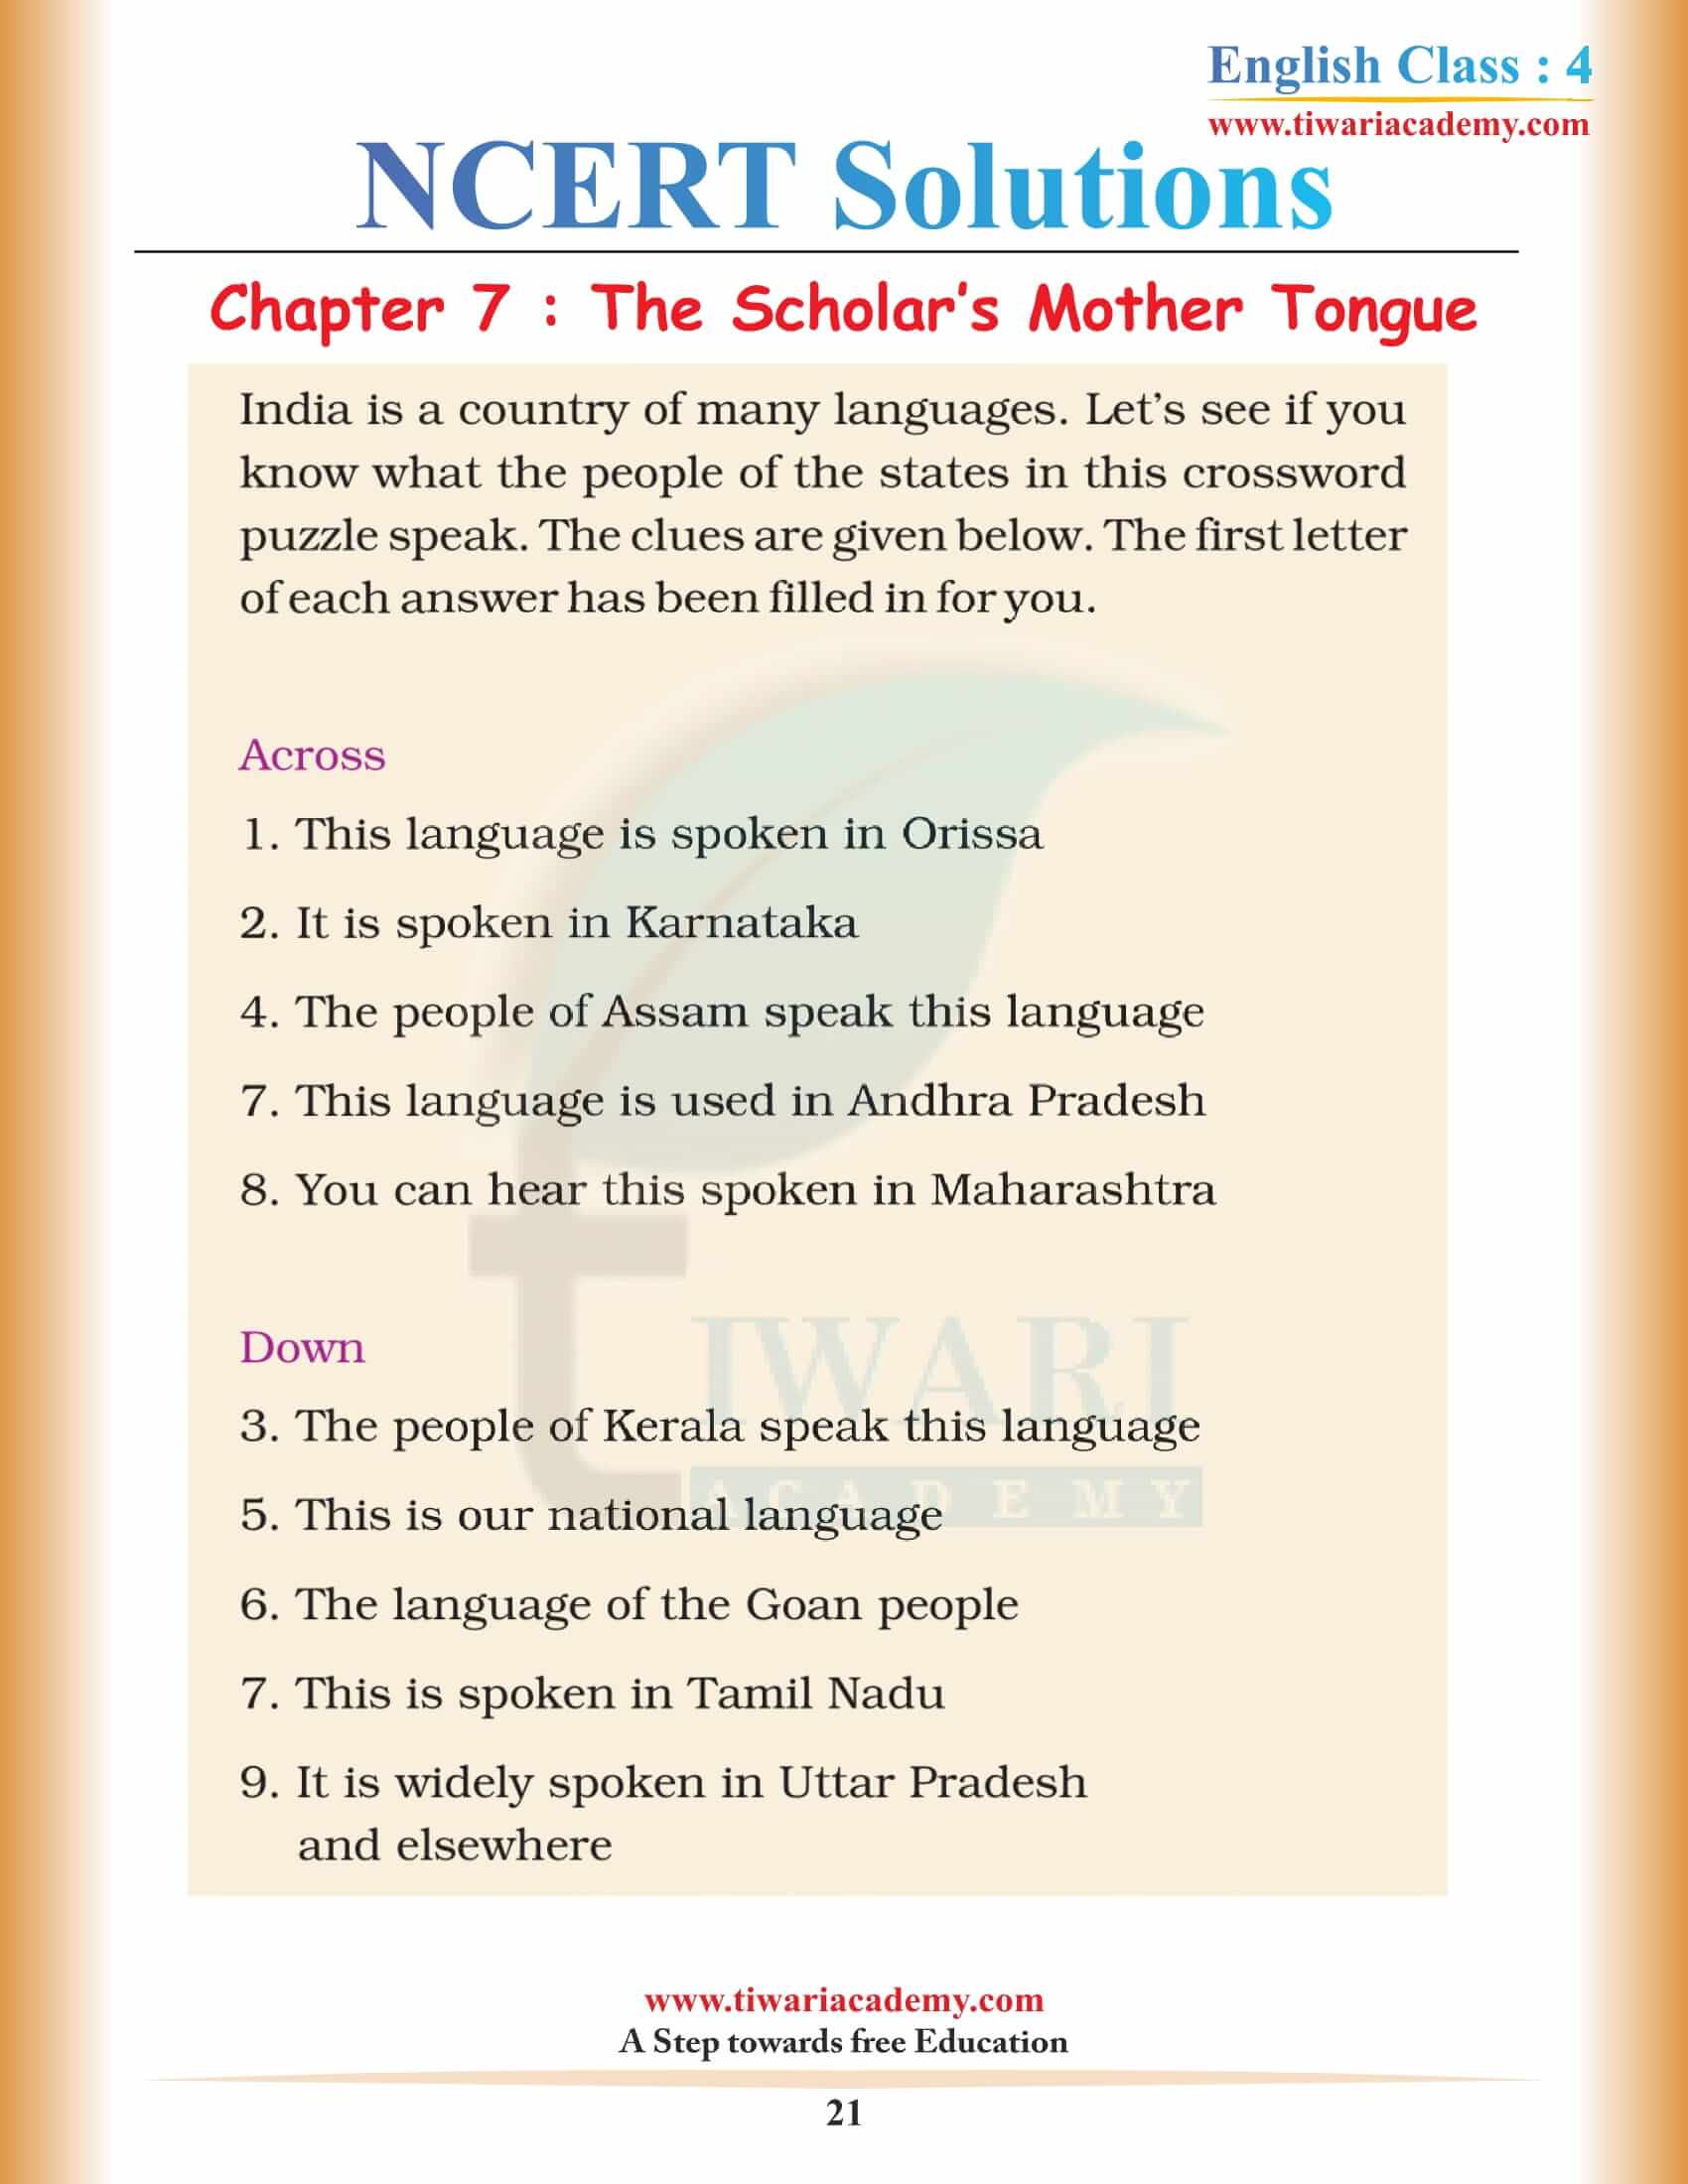 Class 4 NCERT English Book Unit 7 free download